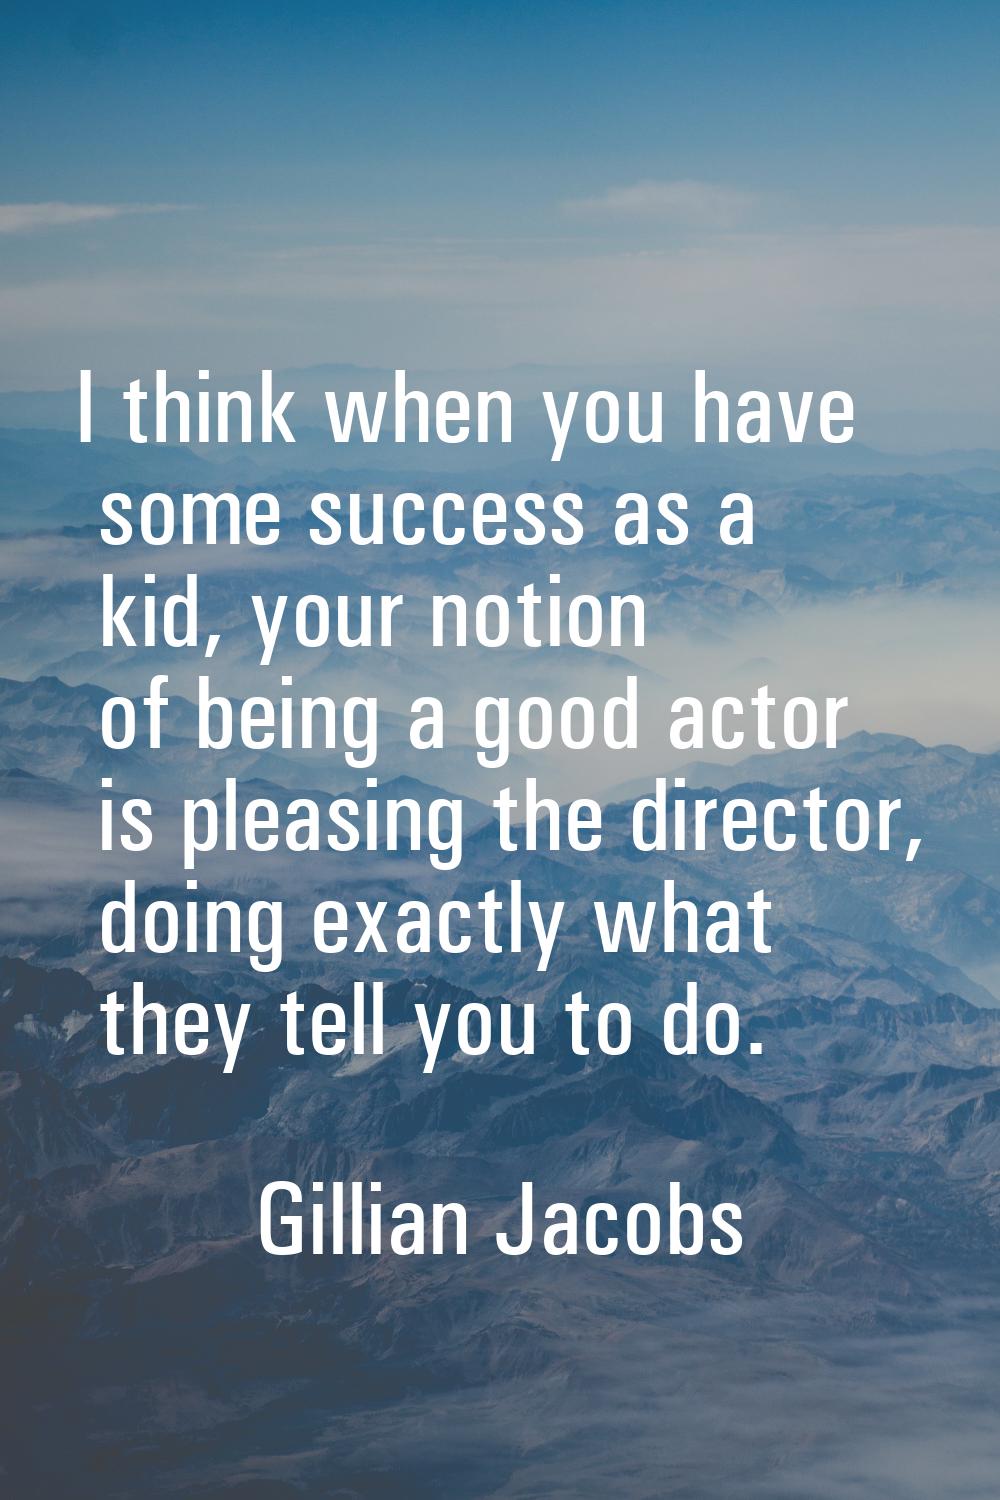 I think when you have some success as a kid, your notion of being a good actor is pleasing the dire